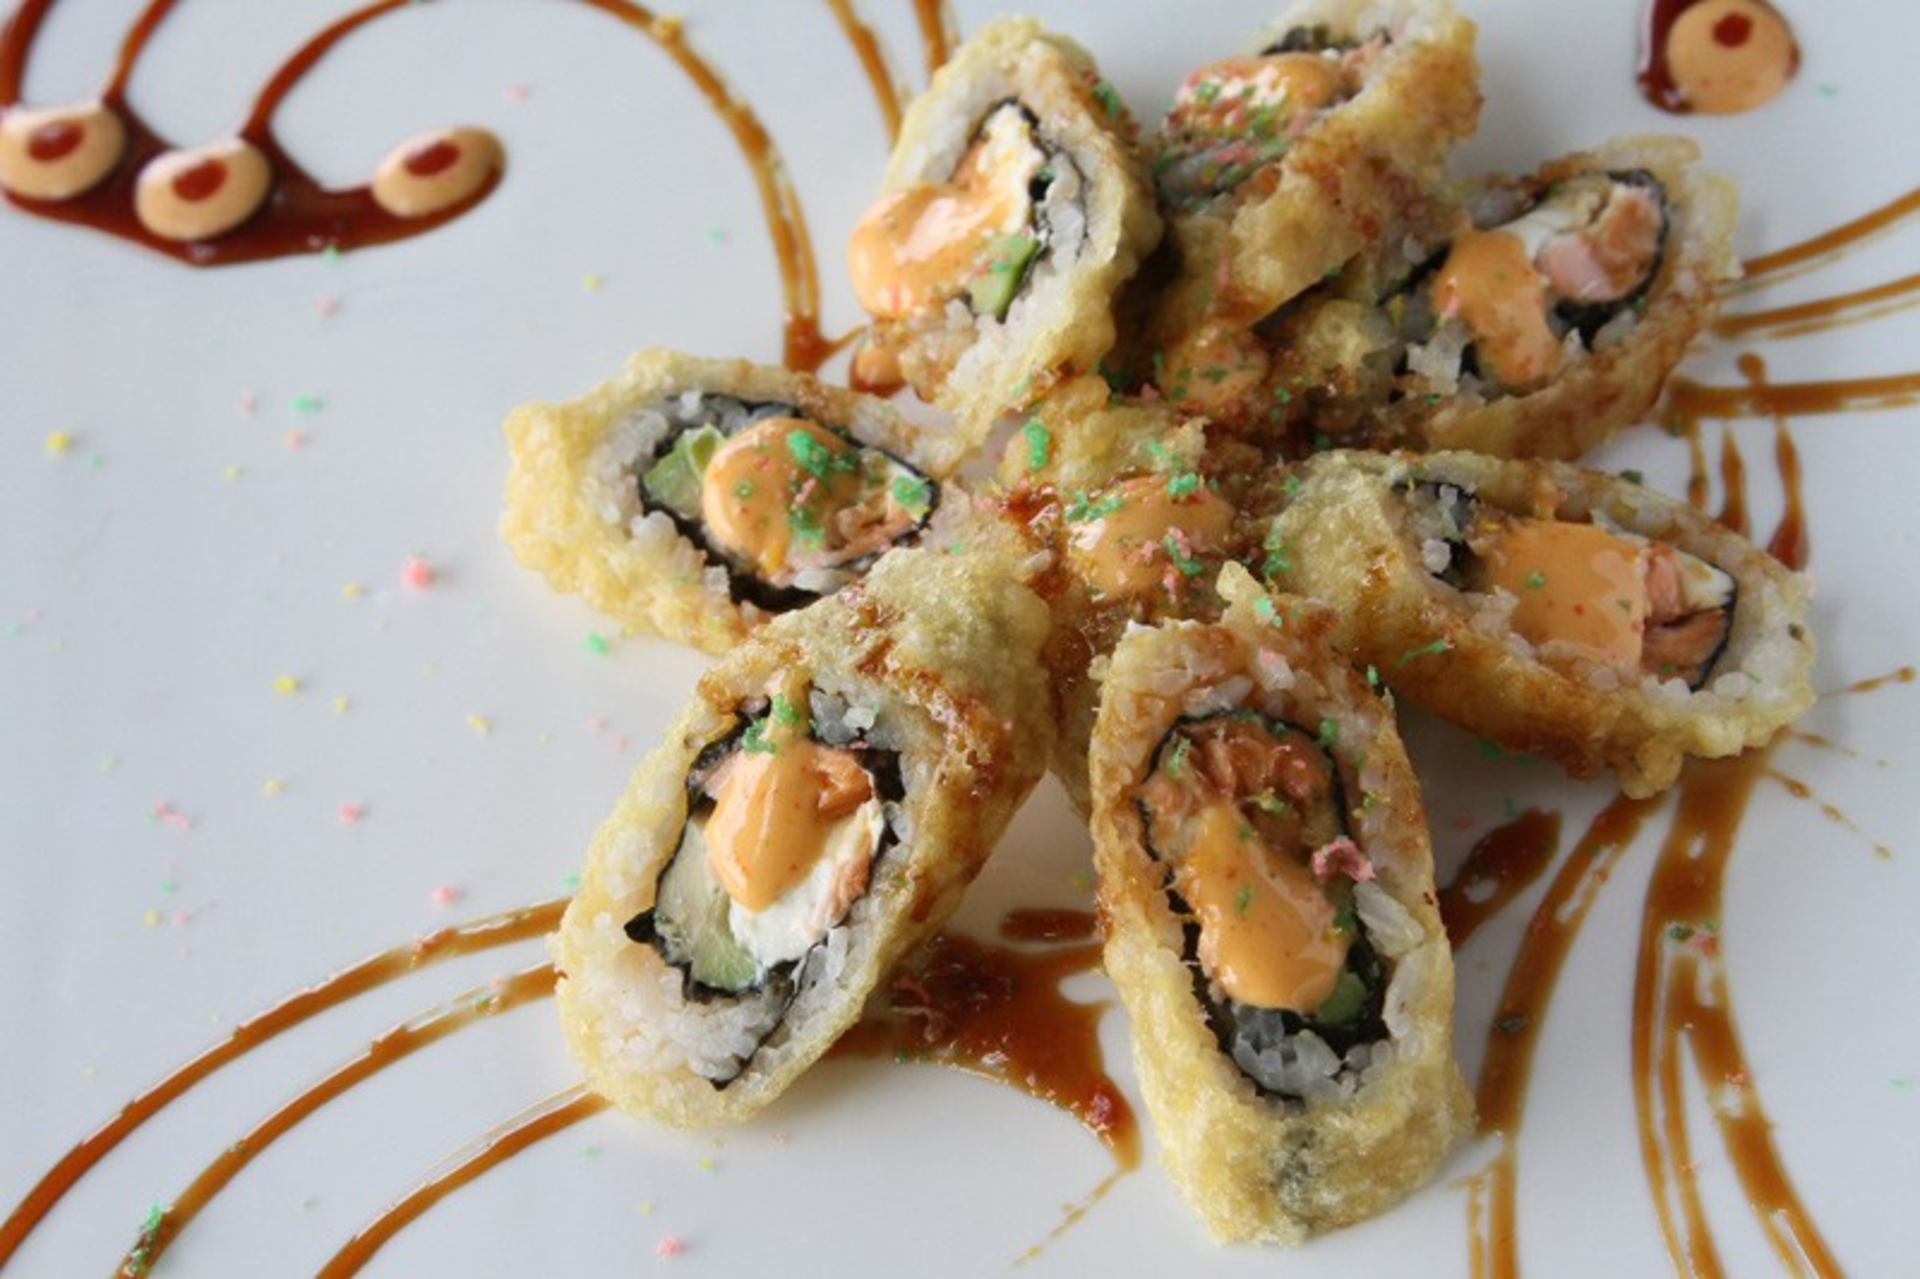 Sushi in Lee's Summit? Sure — on Rice Road, no less